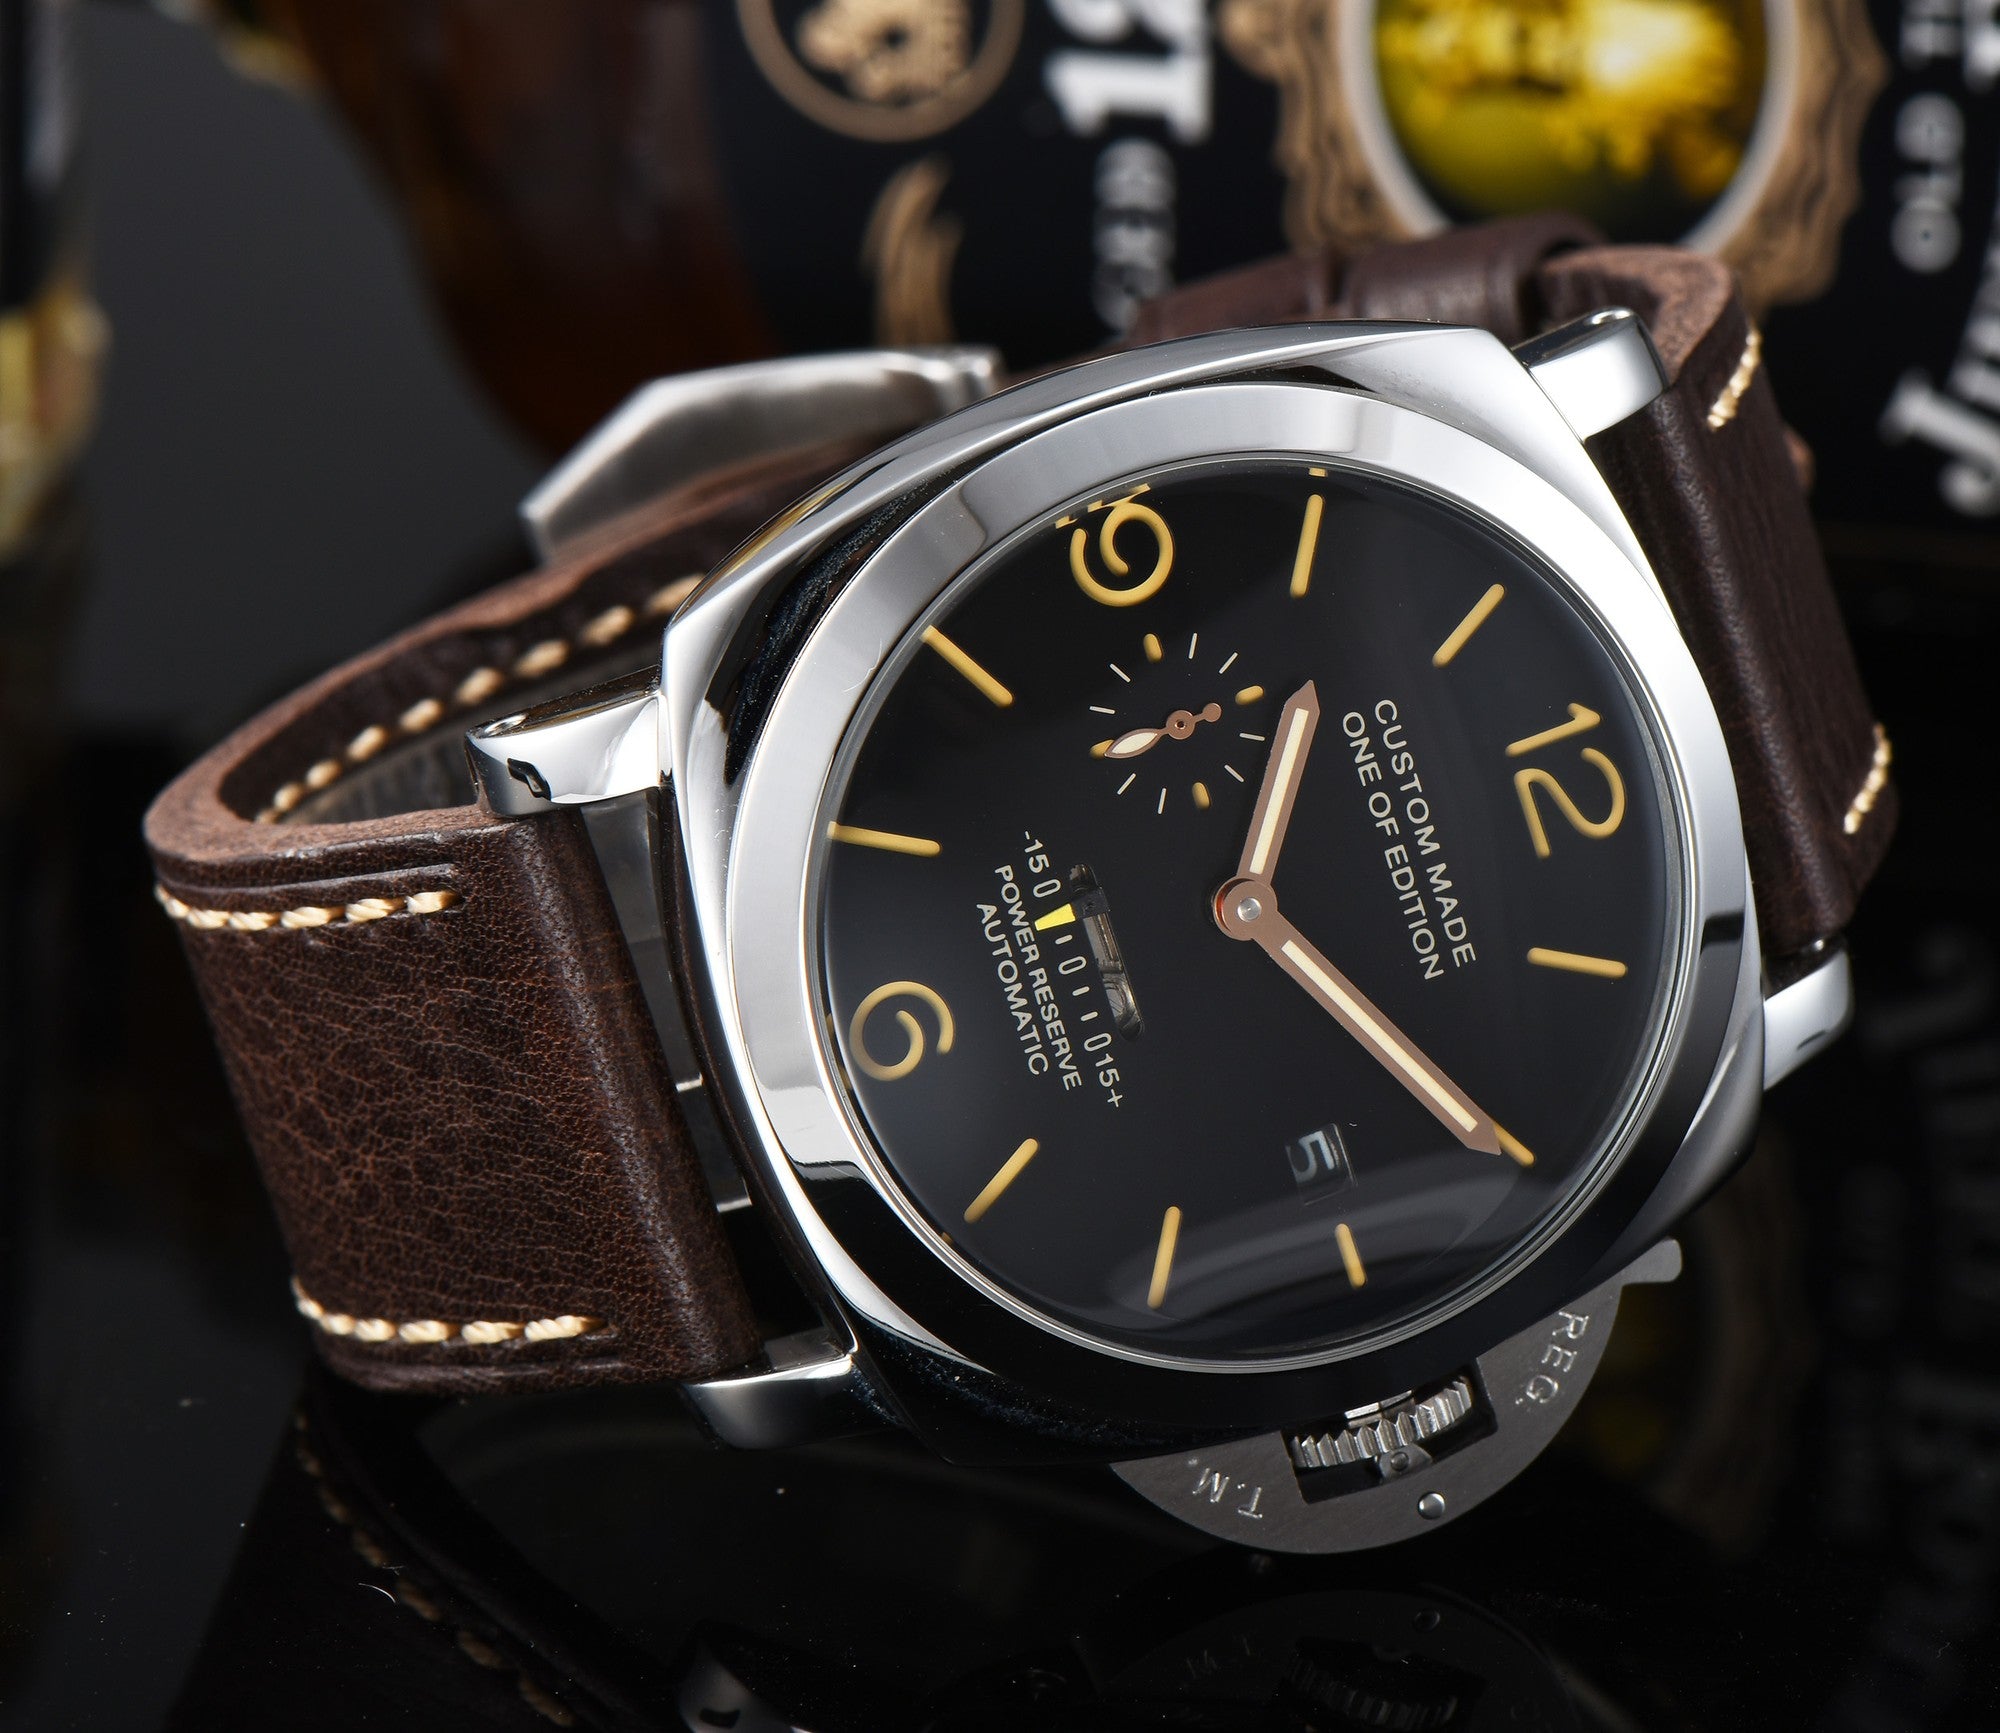 Parnis Military 47mm Self-winding Watch Men's Leather Belt Silver / Suit, Popular Luxury Brand / Waterproof / Recommended P42